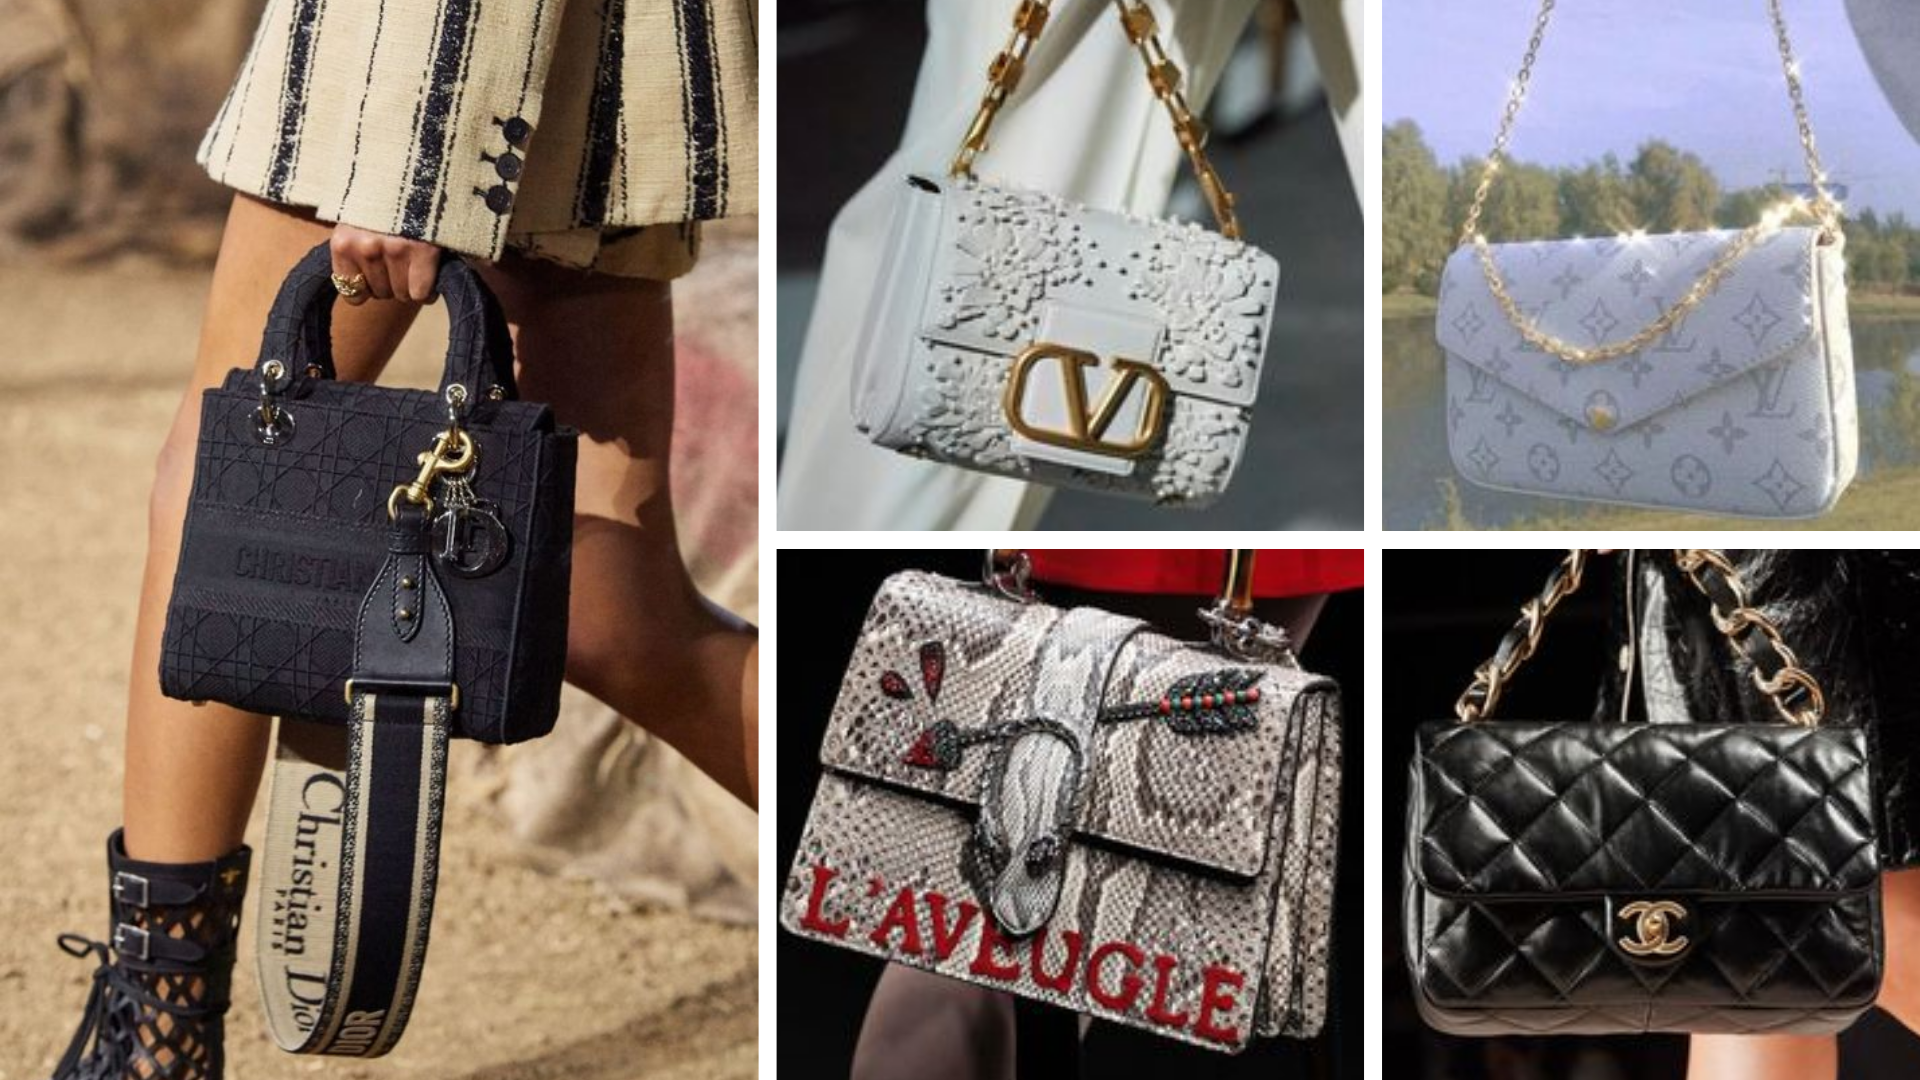 Michael Kors vs Louis Vuitton: Which Brand Is Best for You?